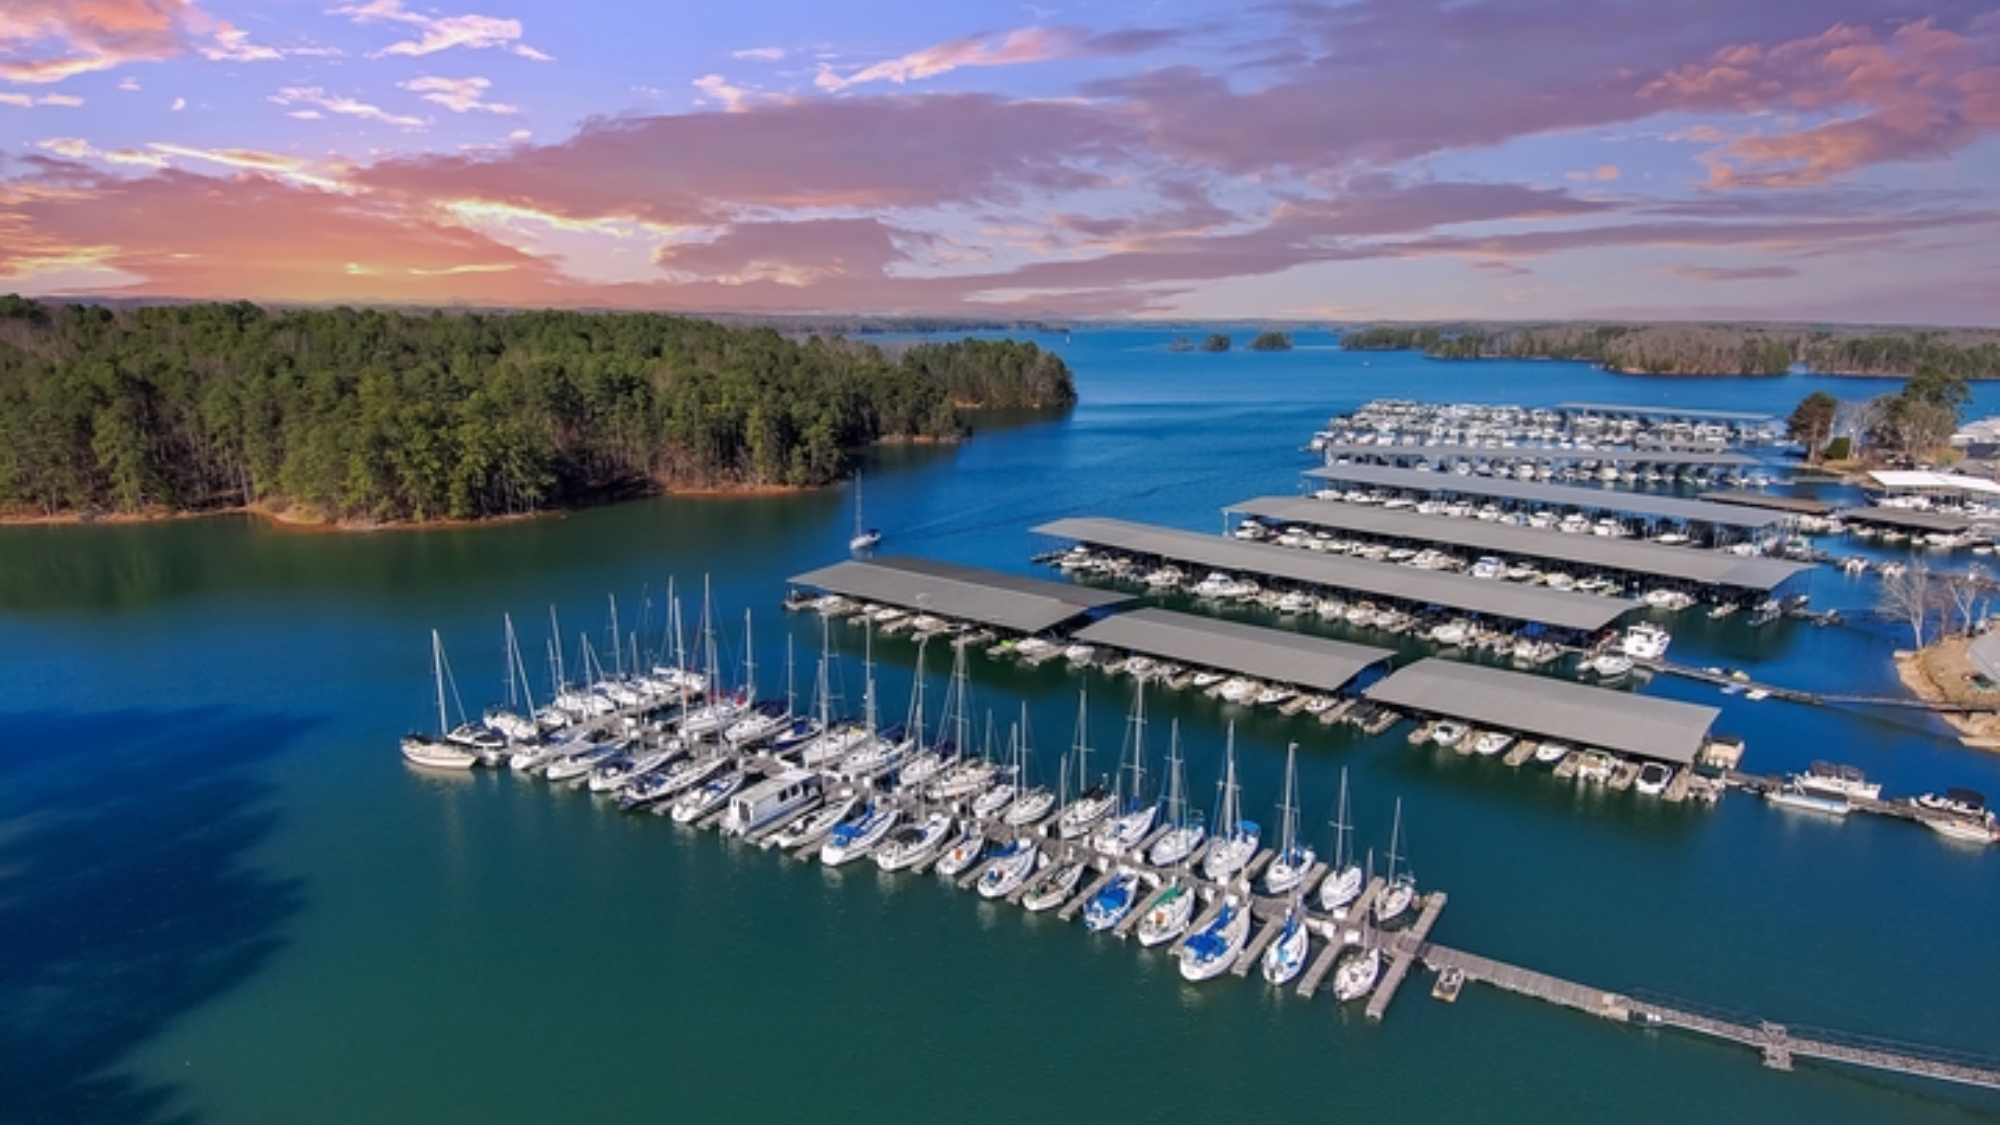 Beauty and Value on Lake Lanier